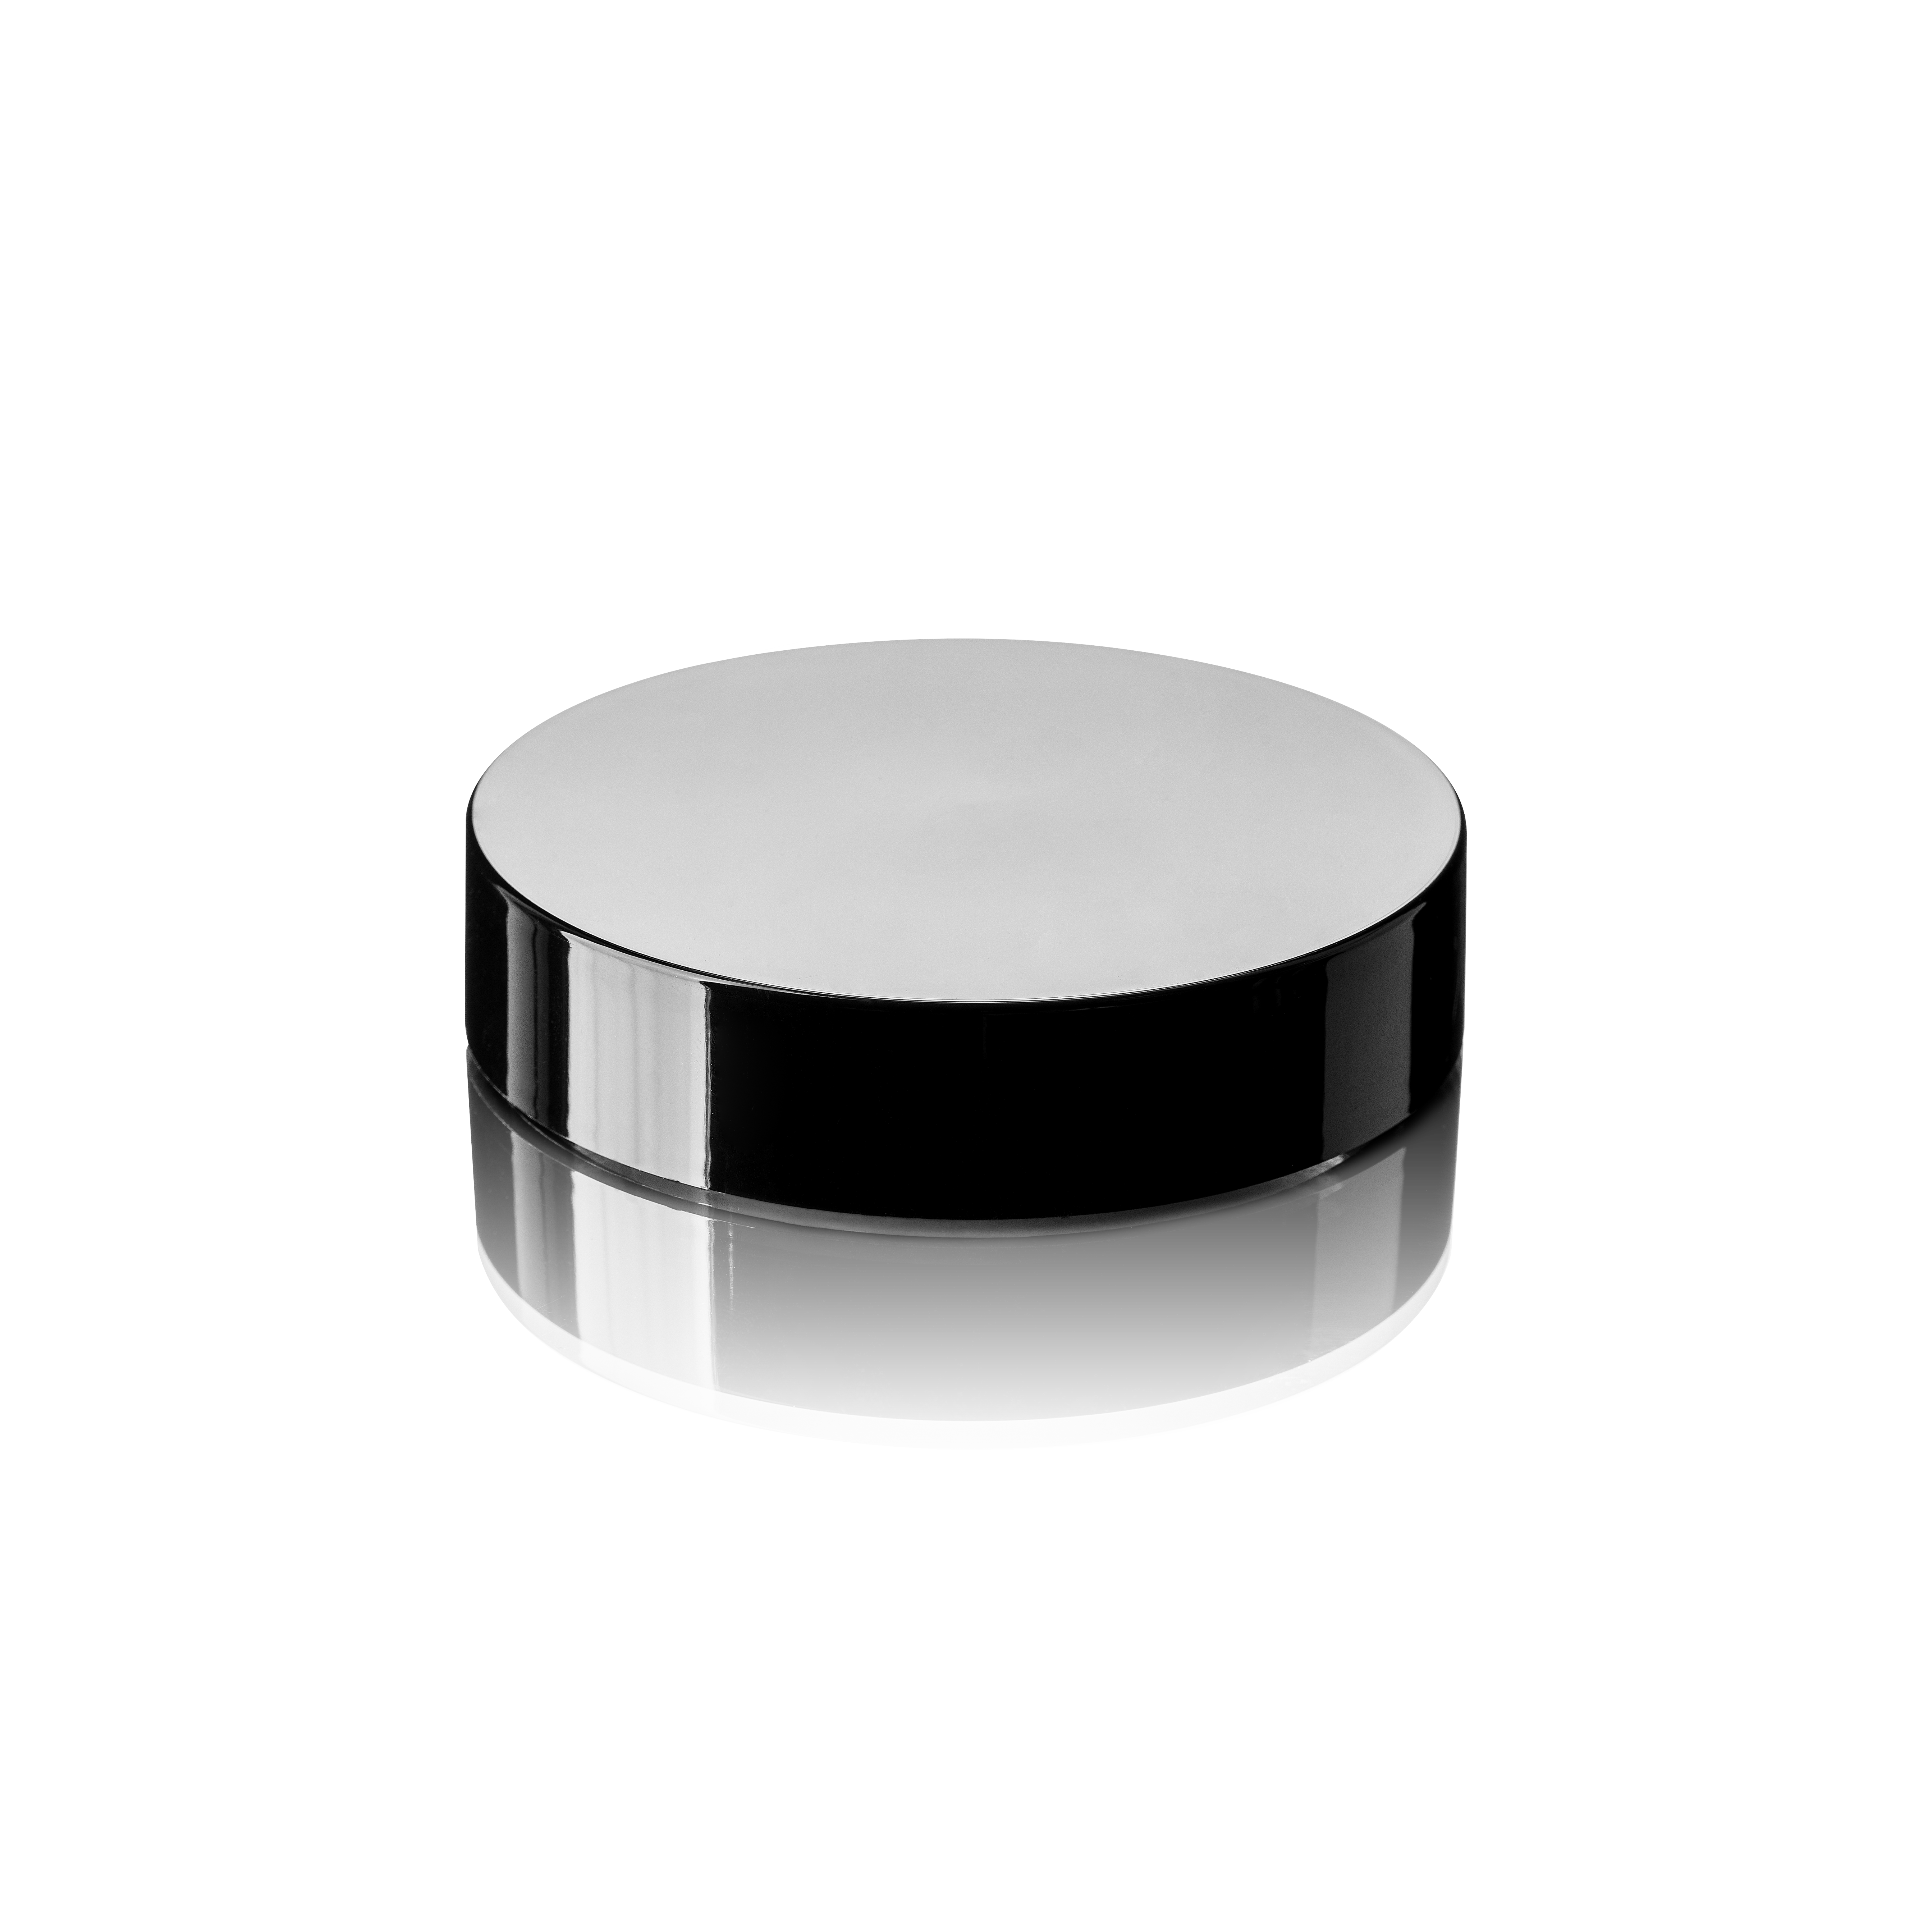 Child-resistant lid Modern 82mm, PP, black, glossy finish, white inlay (Camellia 240)